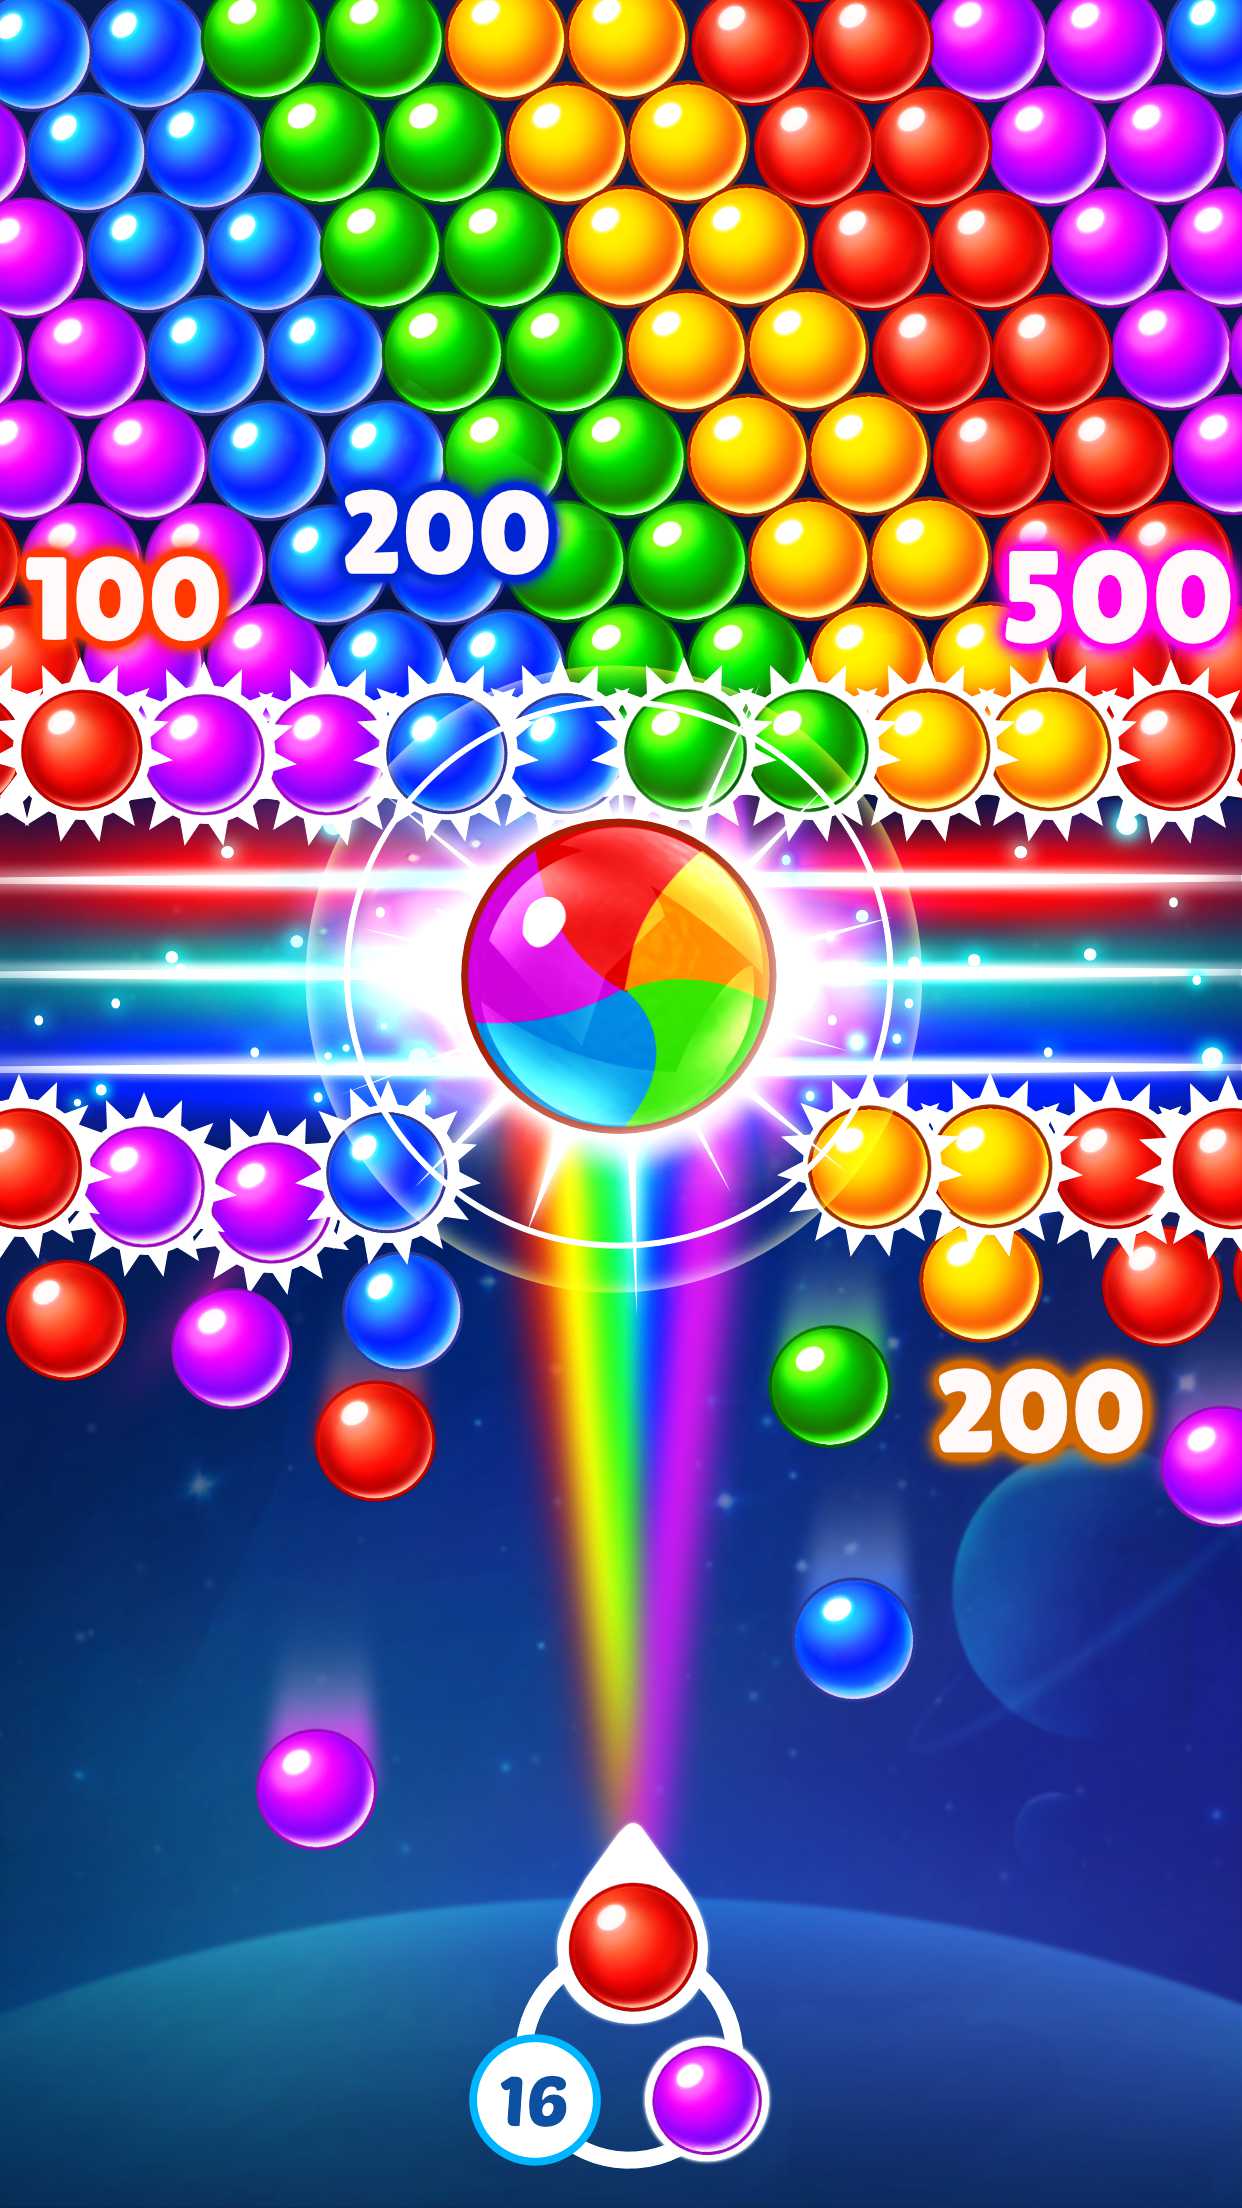 download the last version for apple Pastry Pop Blast - Bubble Shooter